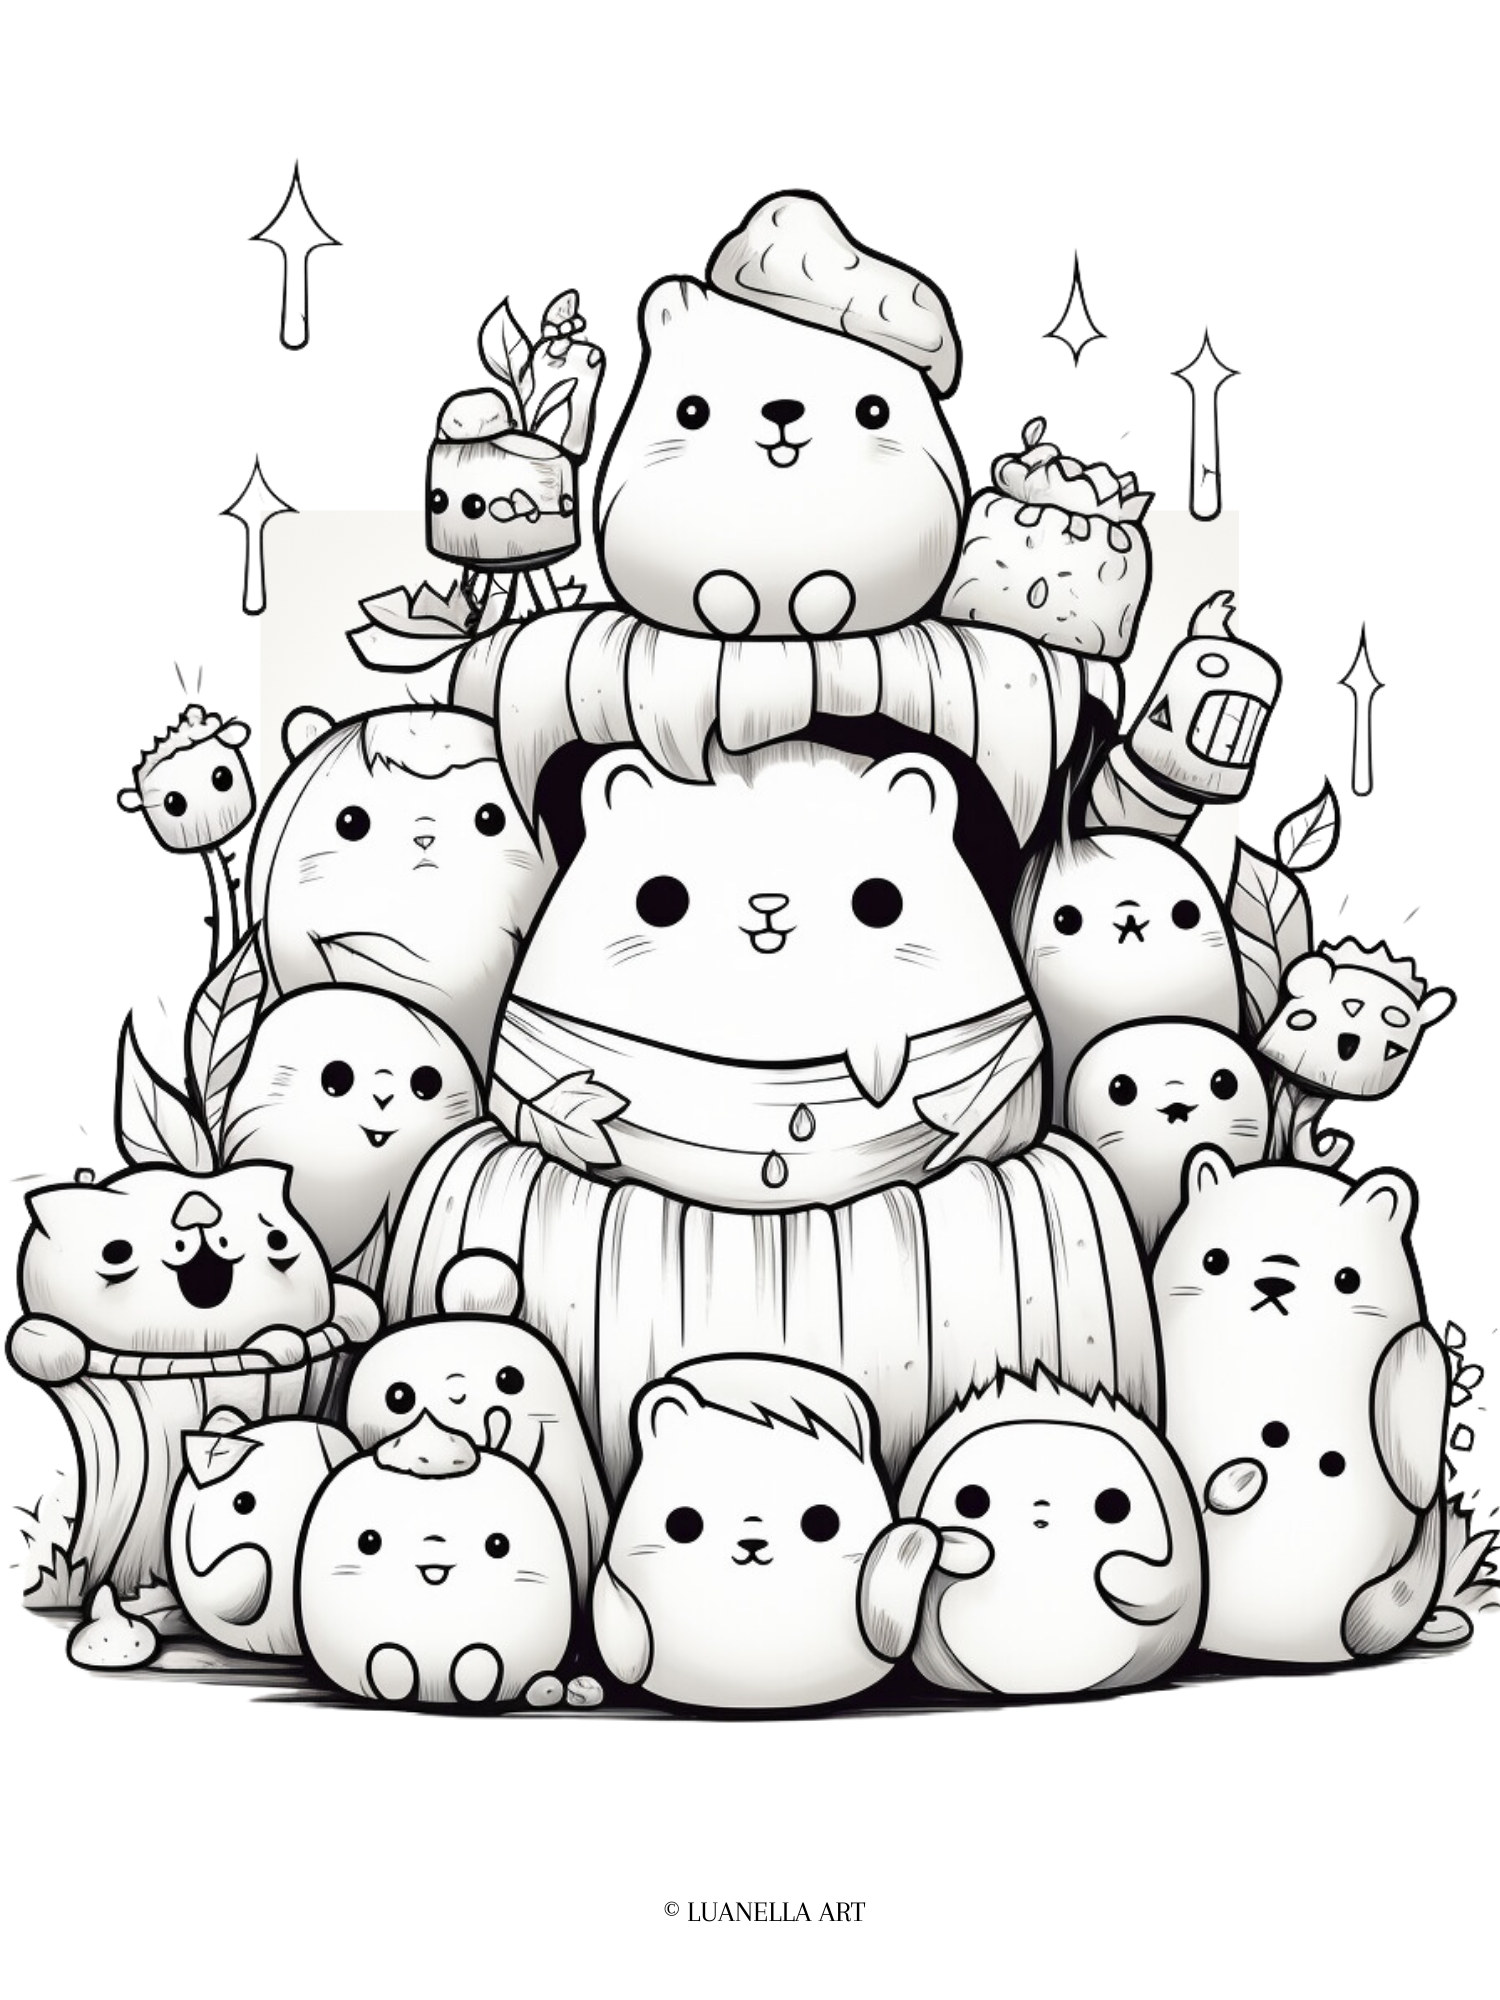 Squishmallow coloring page coloring page instant digital download â luanella art